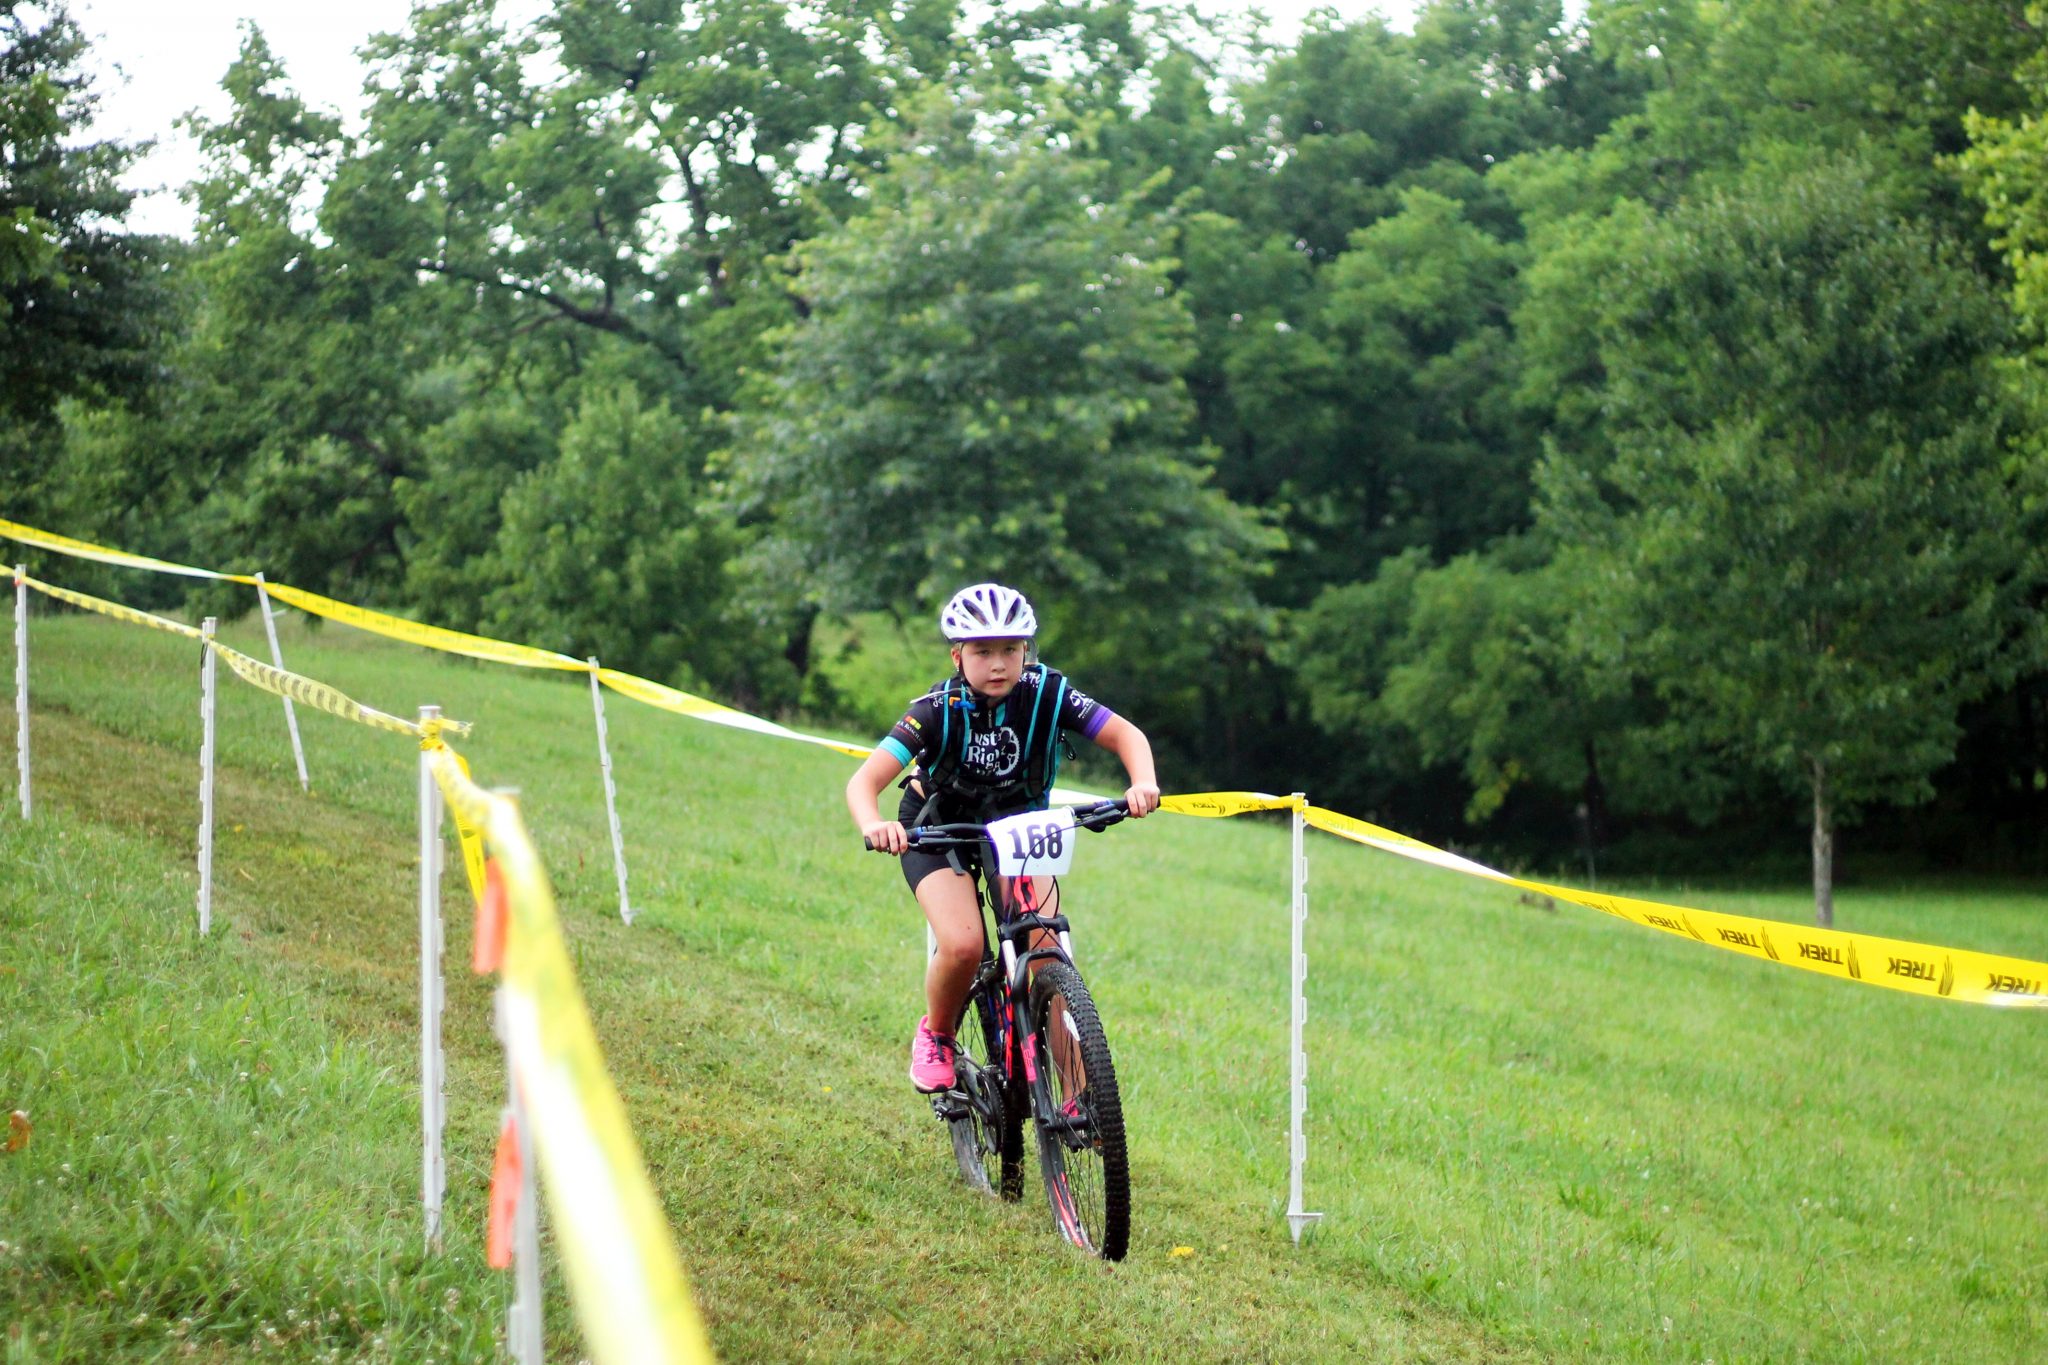 Fishburn youth mountain biker rides downhill at the Play Roanoke race event